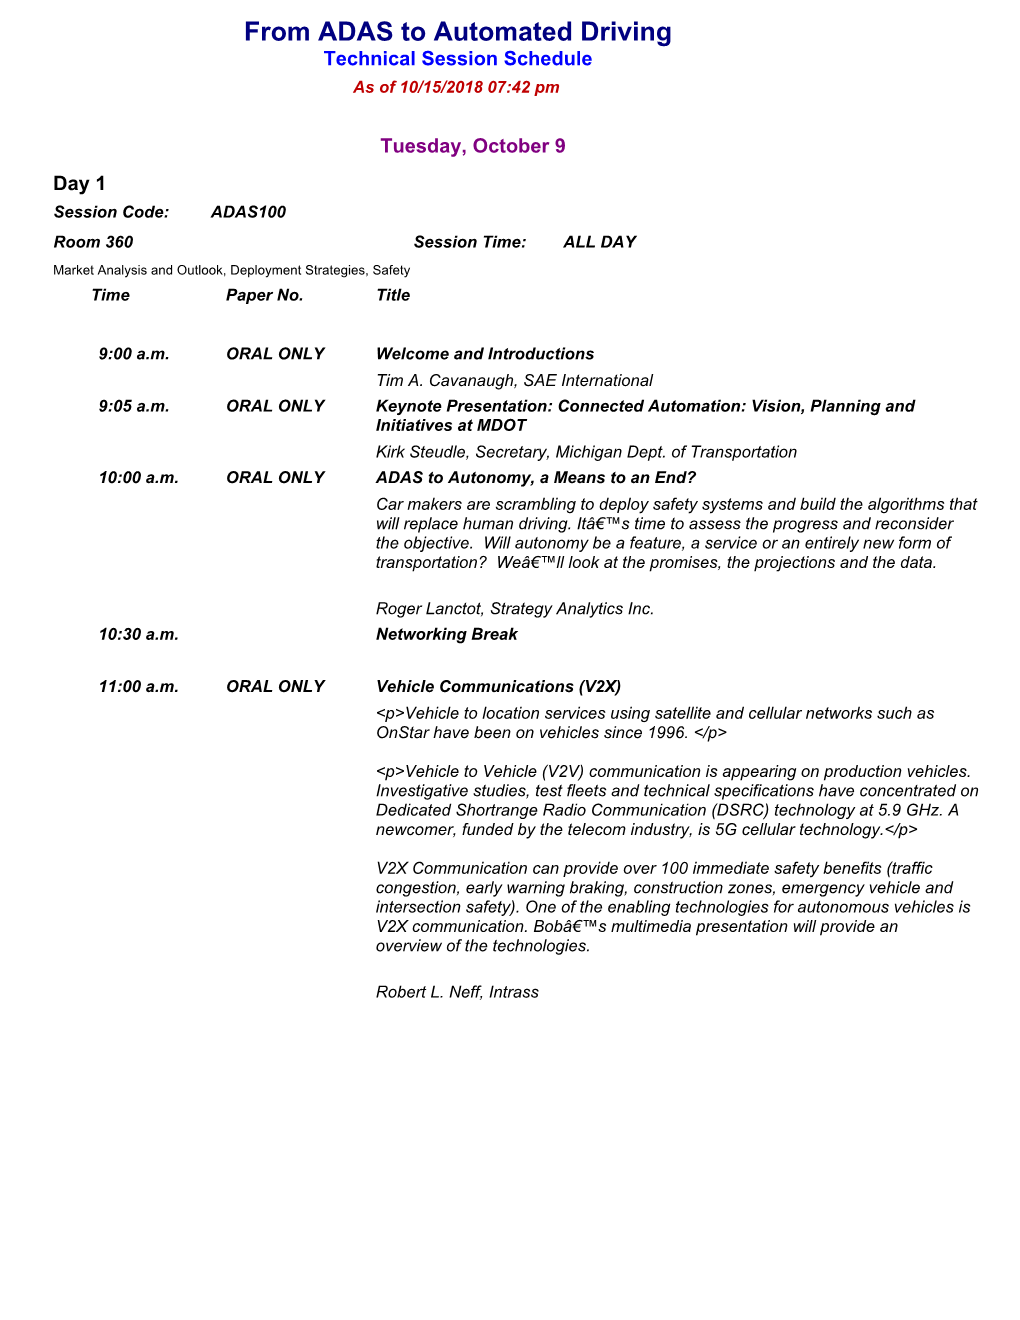 From ADAS to Automated Driving Technical Session Schedule As of 10/15/2018 07:42 Pm